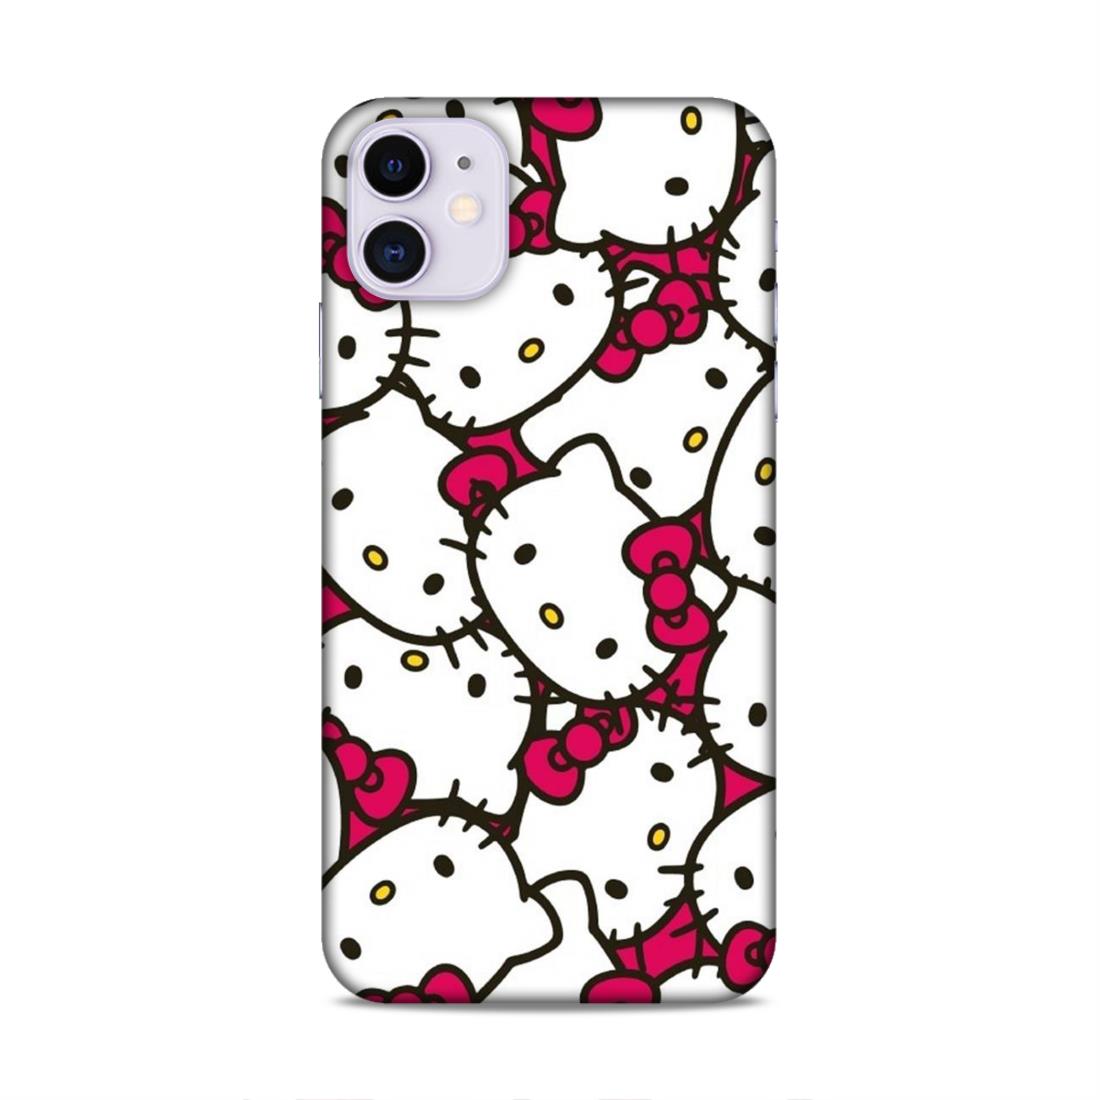 Kitty Hard Back Case For Apple iPhone 11